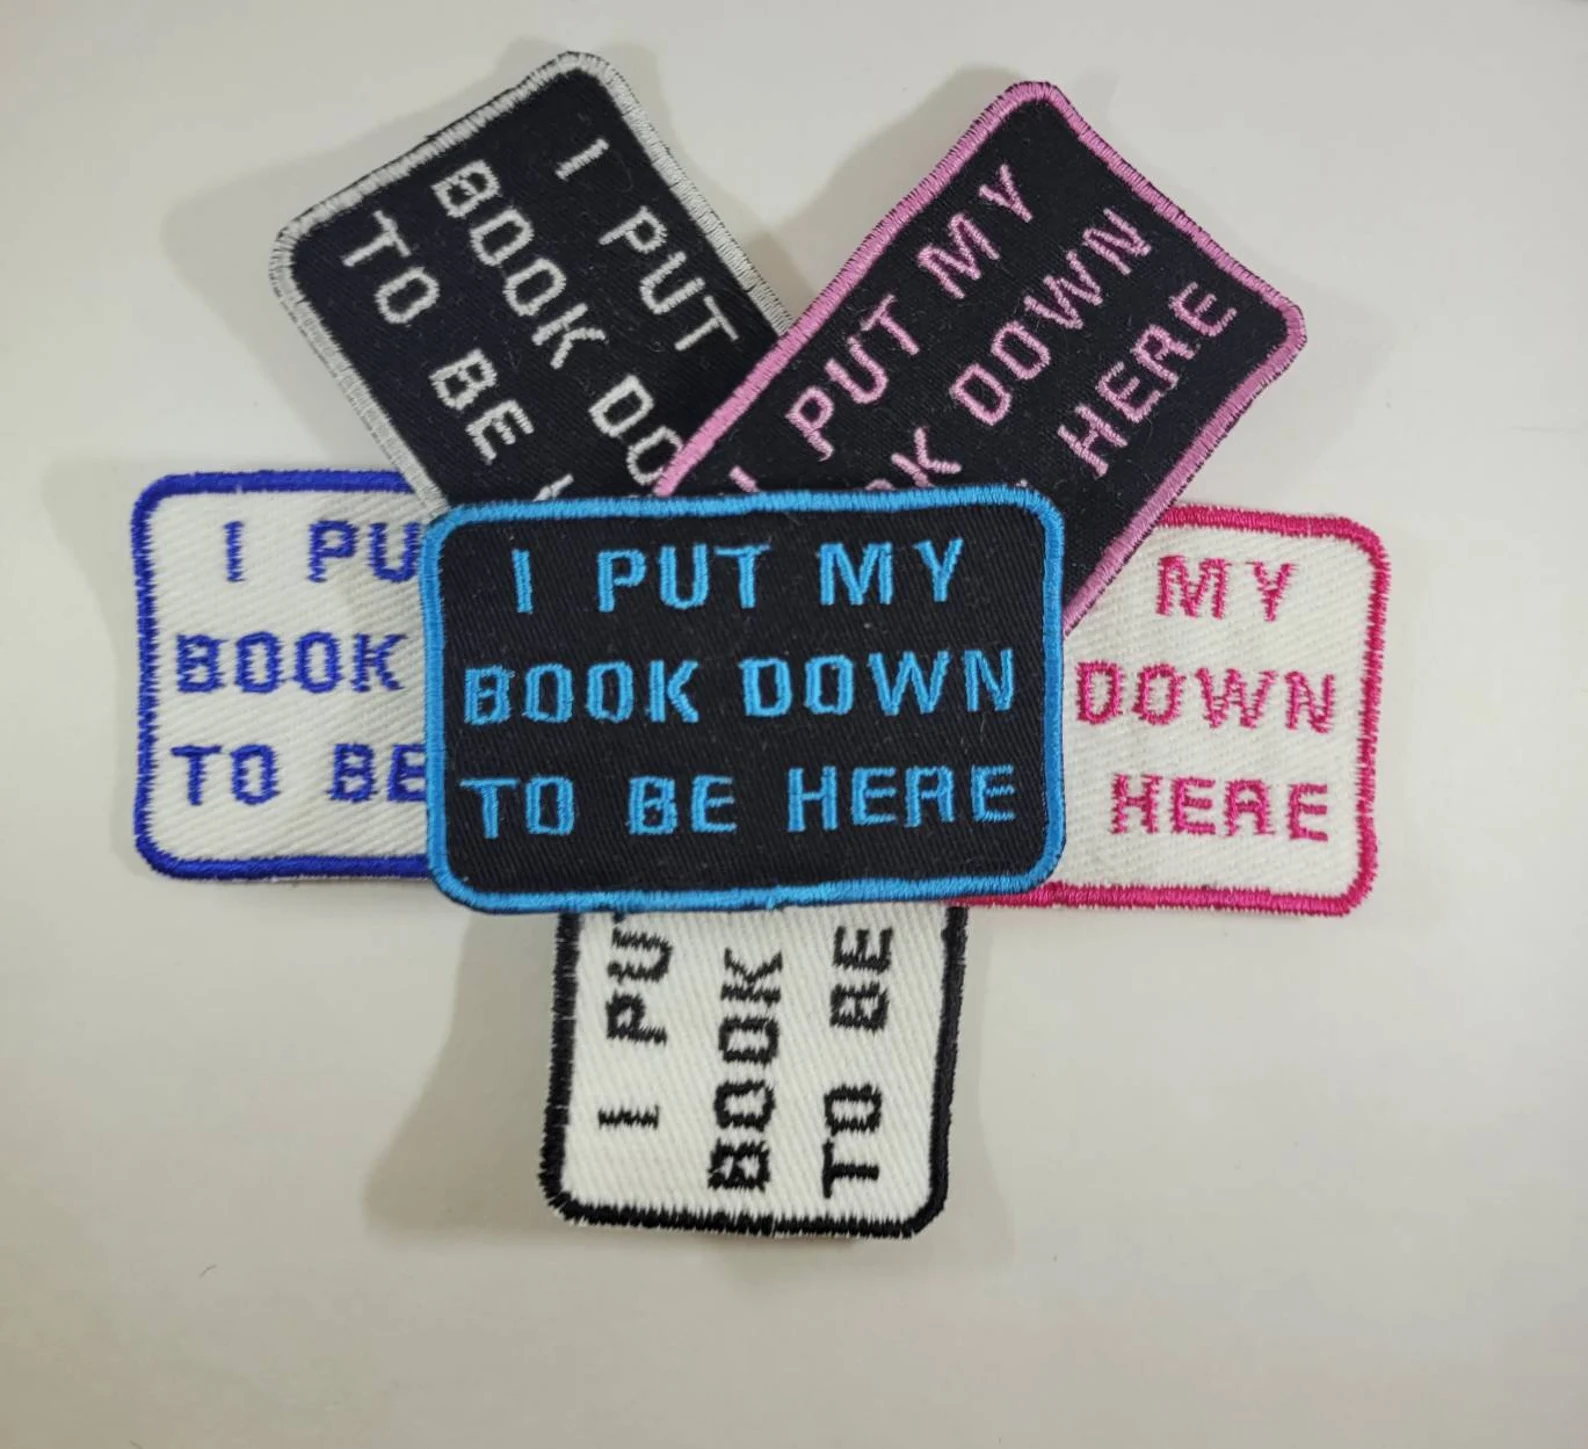 A pile of several small rectangular patches, in different color stitching, with the slogan, "I put my book down to be here."